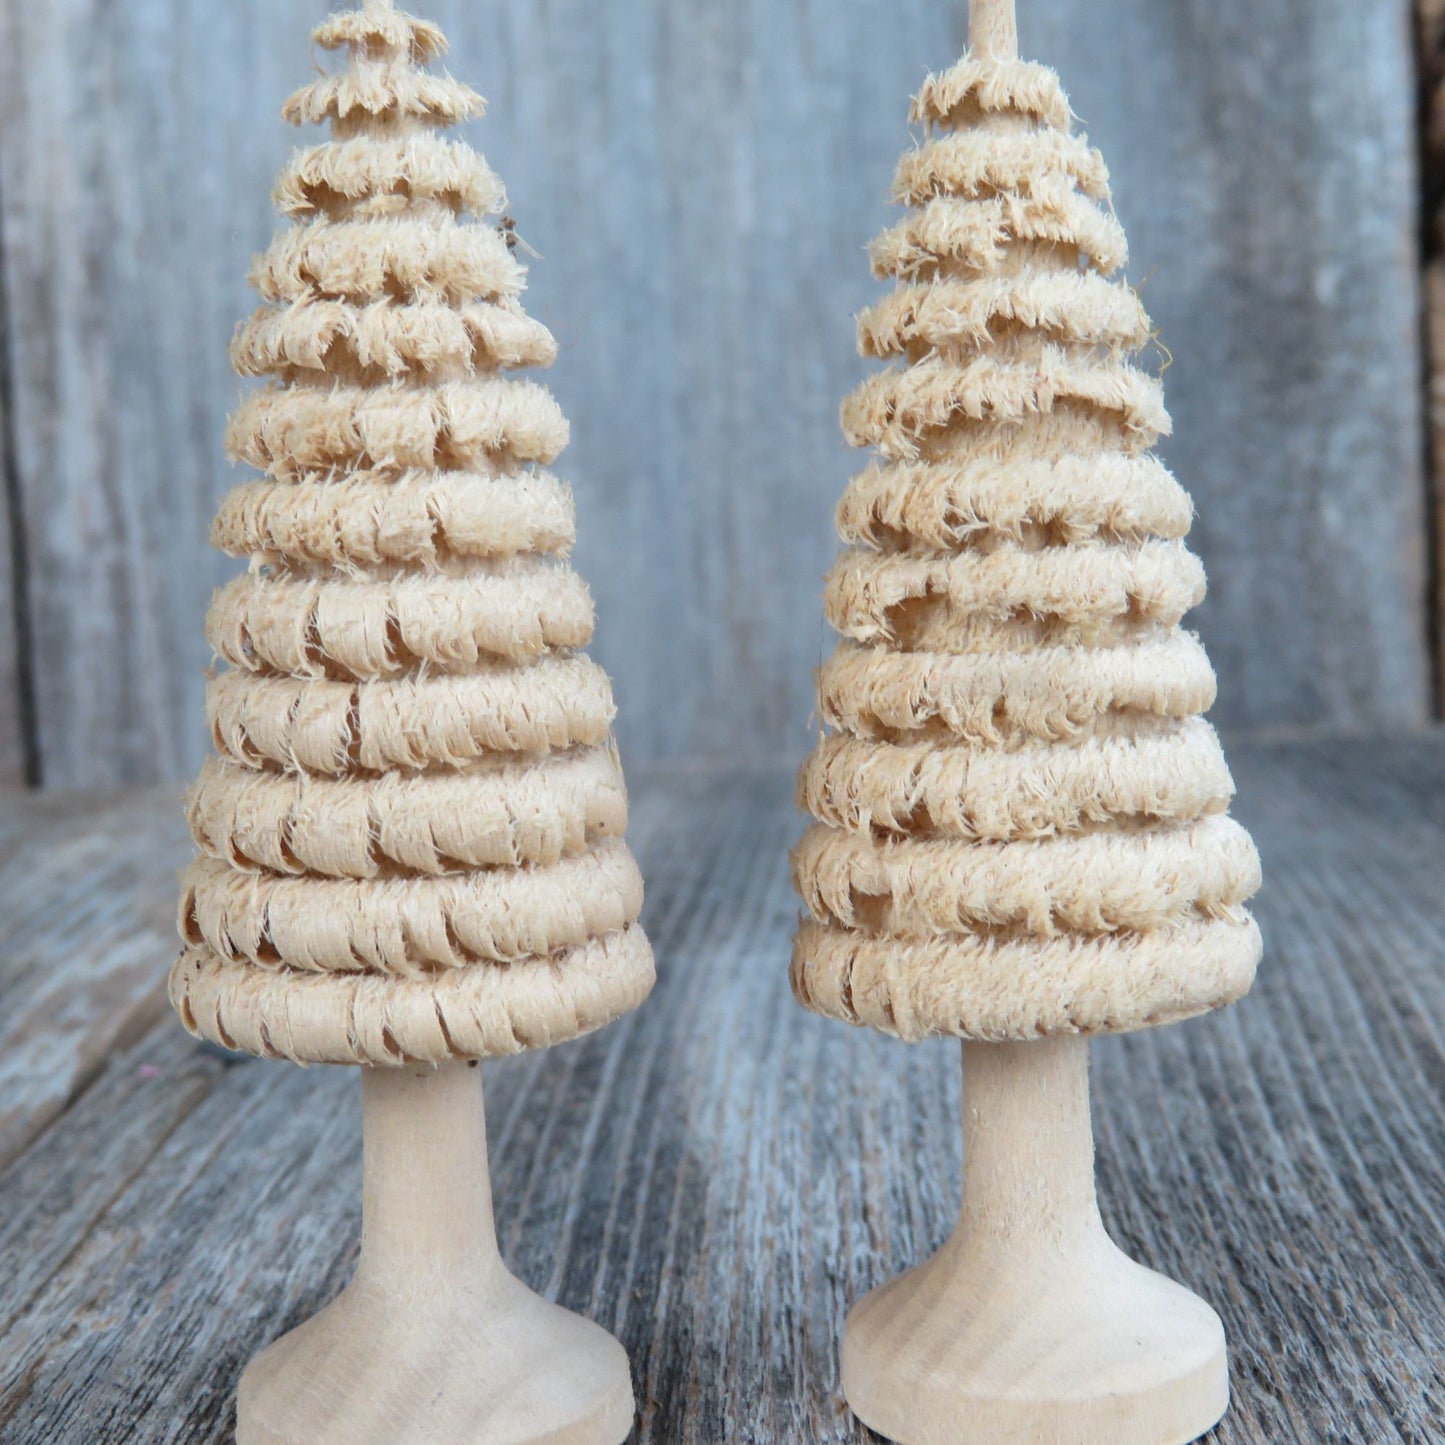 Vintage Curly Wood Trees Christmas Village Miniature Hand Carved Natural Colored